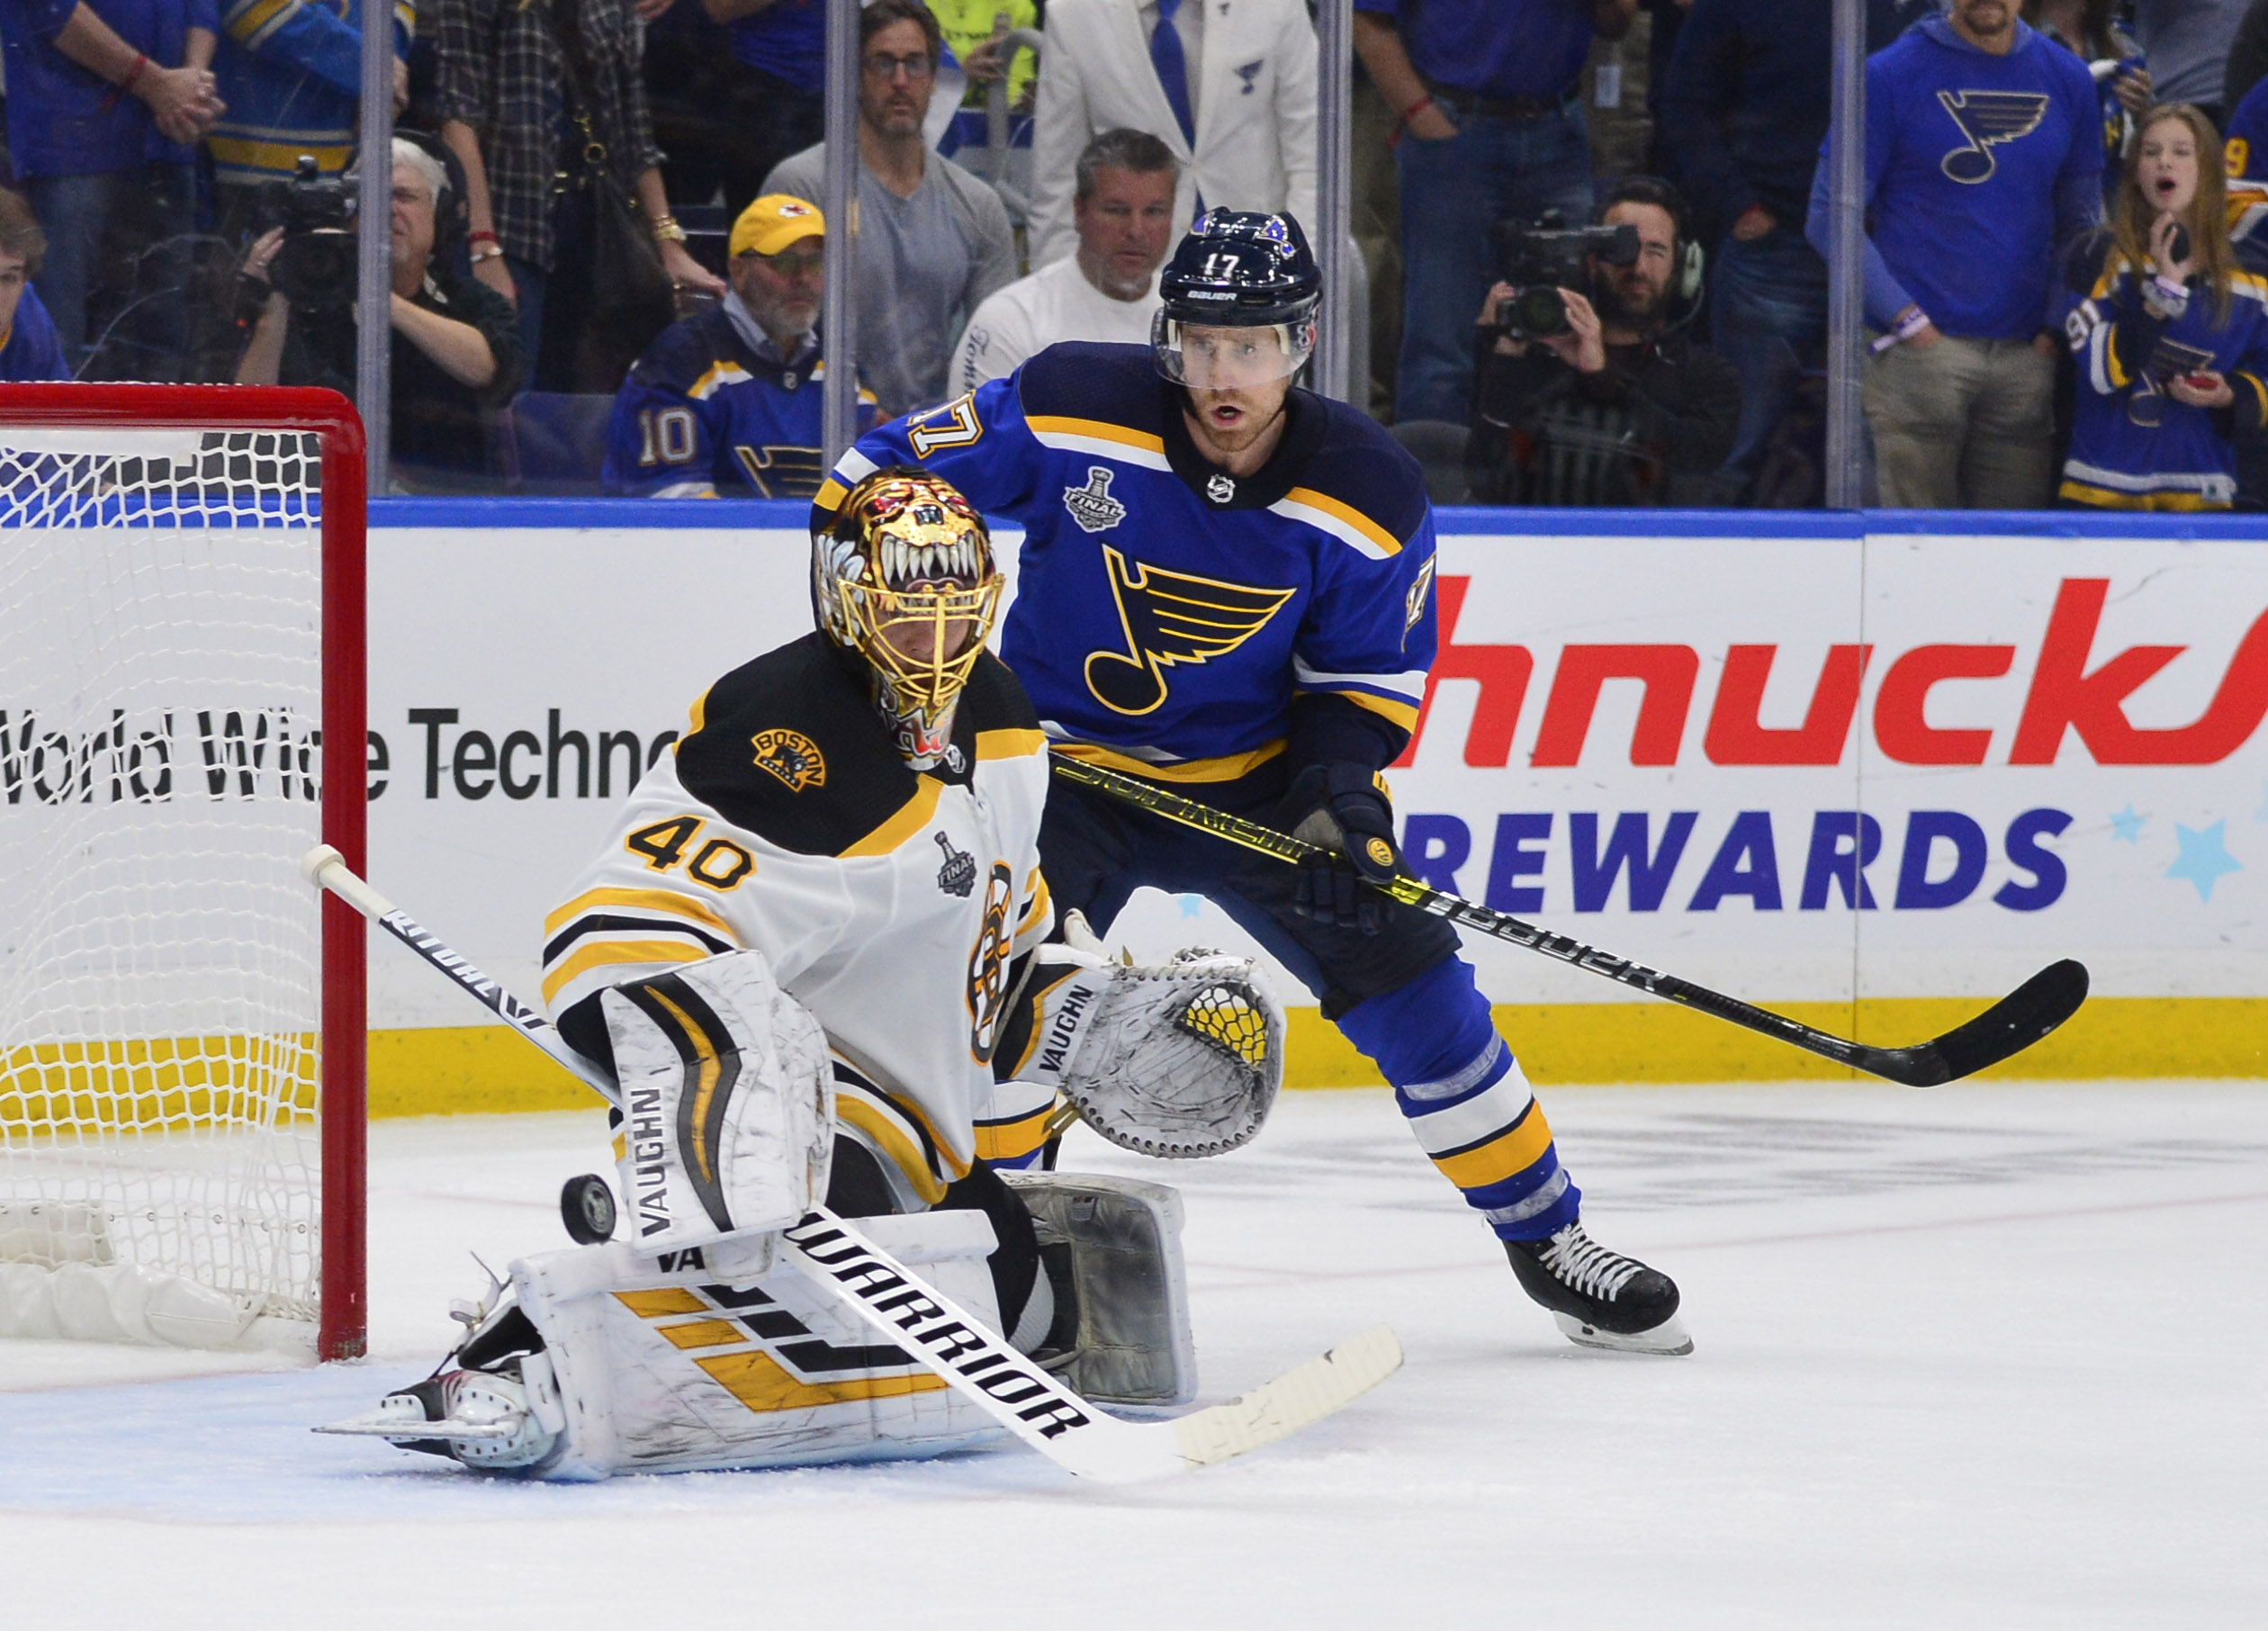 St. Louis Blues at Boston Bruins Game 5 predictions, picks and bets